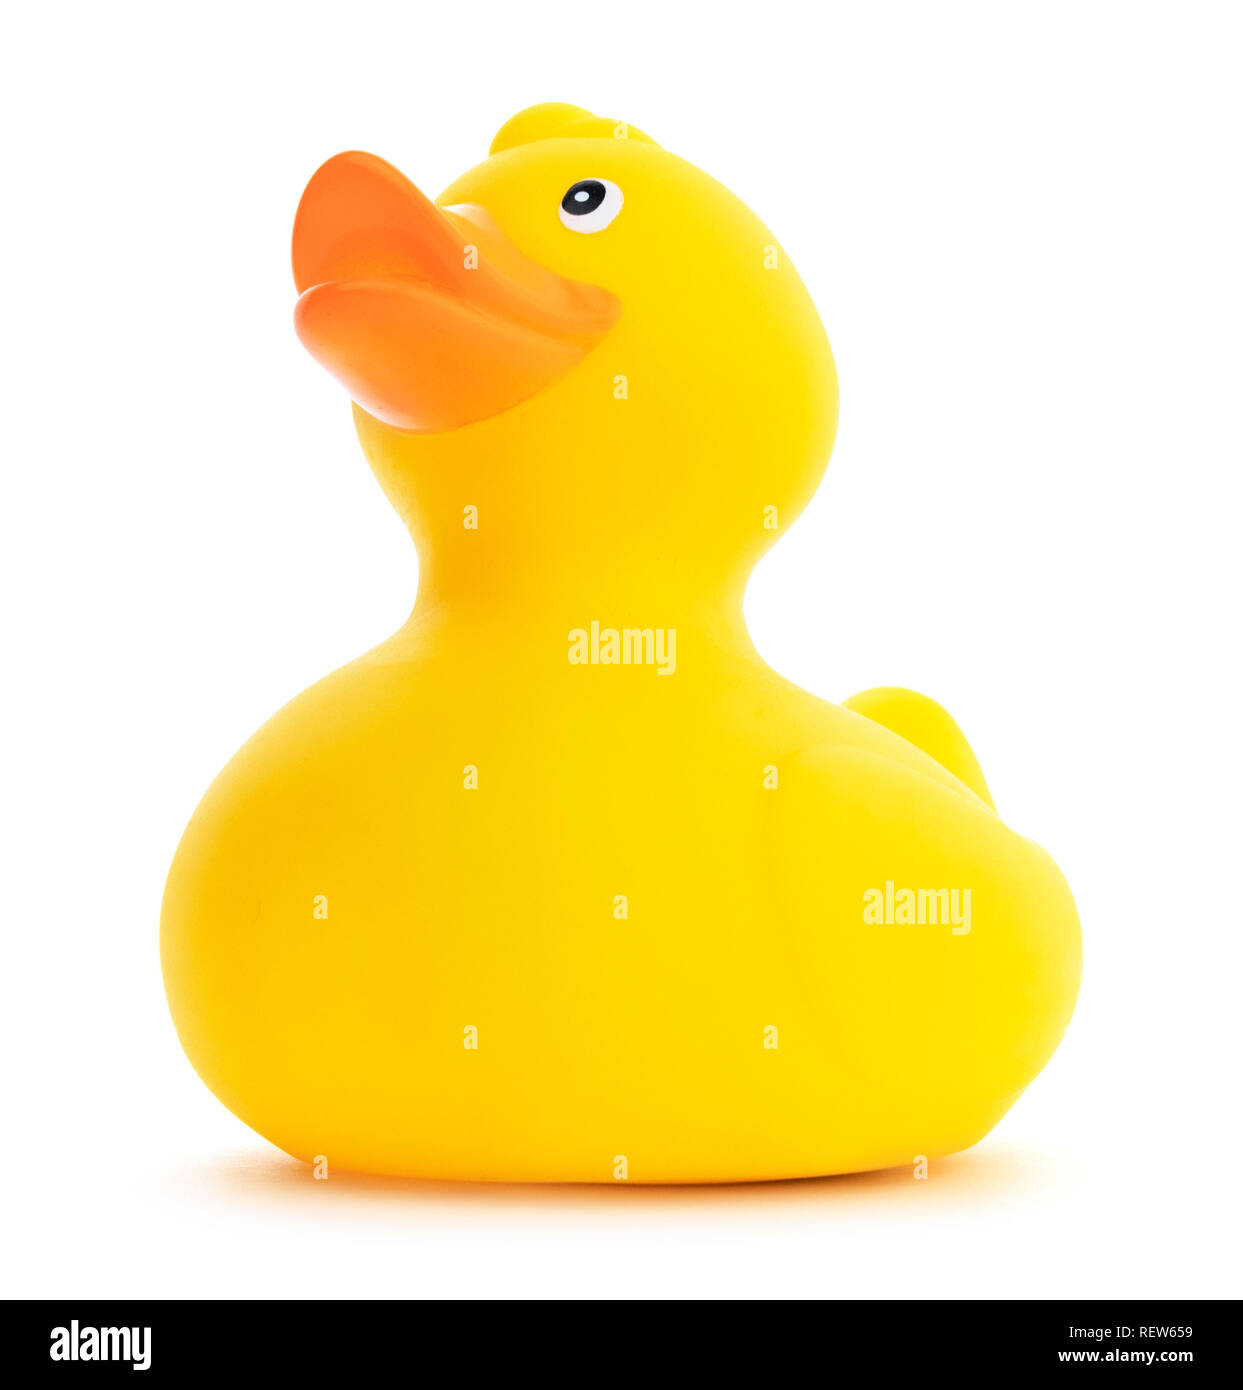 Isolated yellow rubber duck. Low view of a cute yellow rubber ducky on a white background. Stock Photo